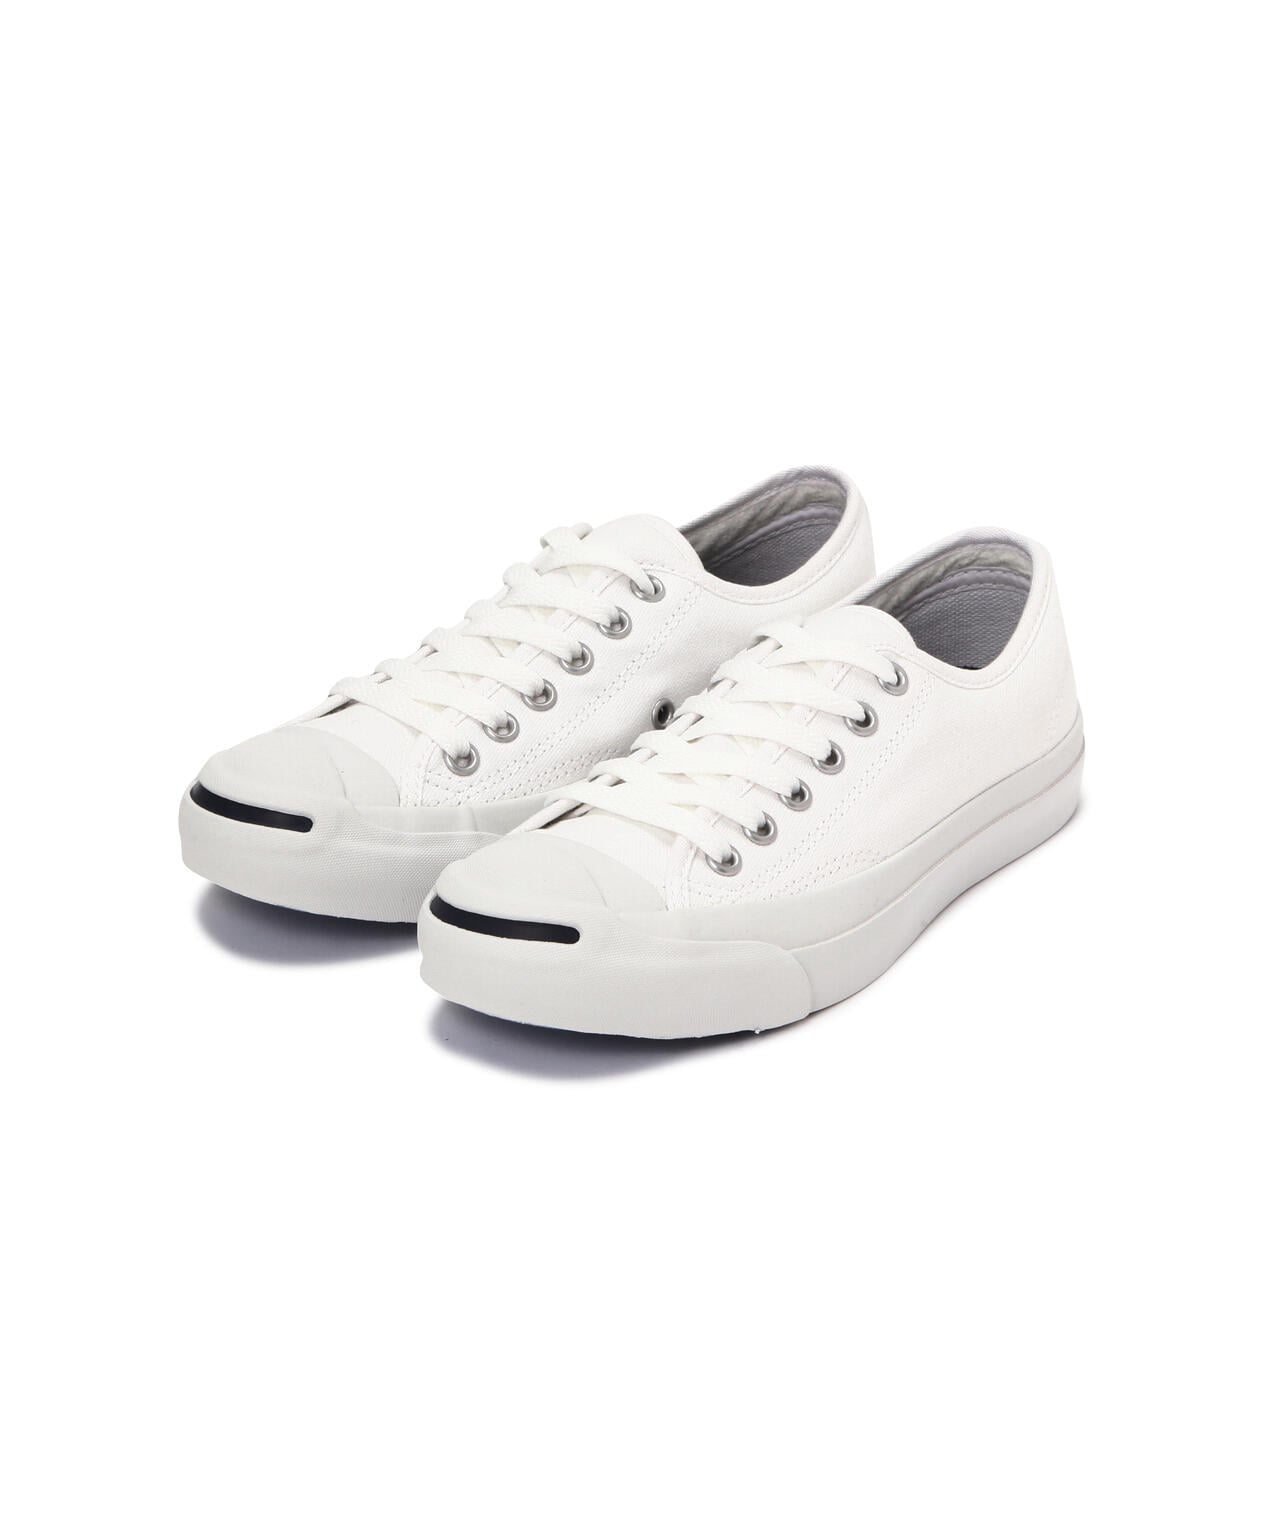 CONVERSE JACK PURCELL LOW